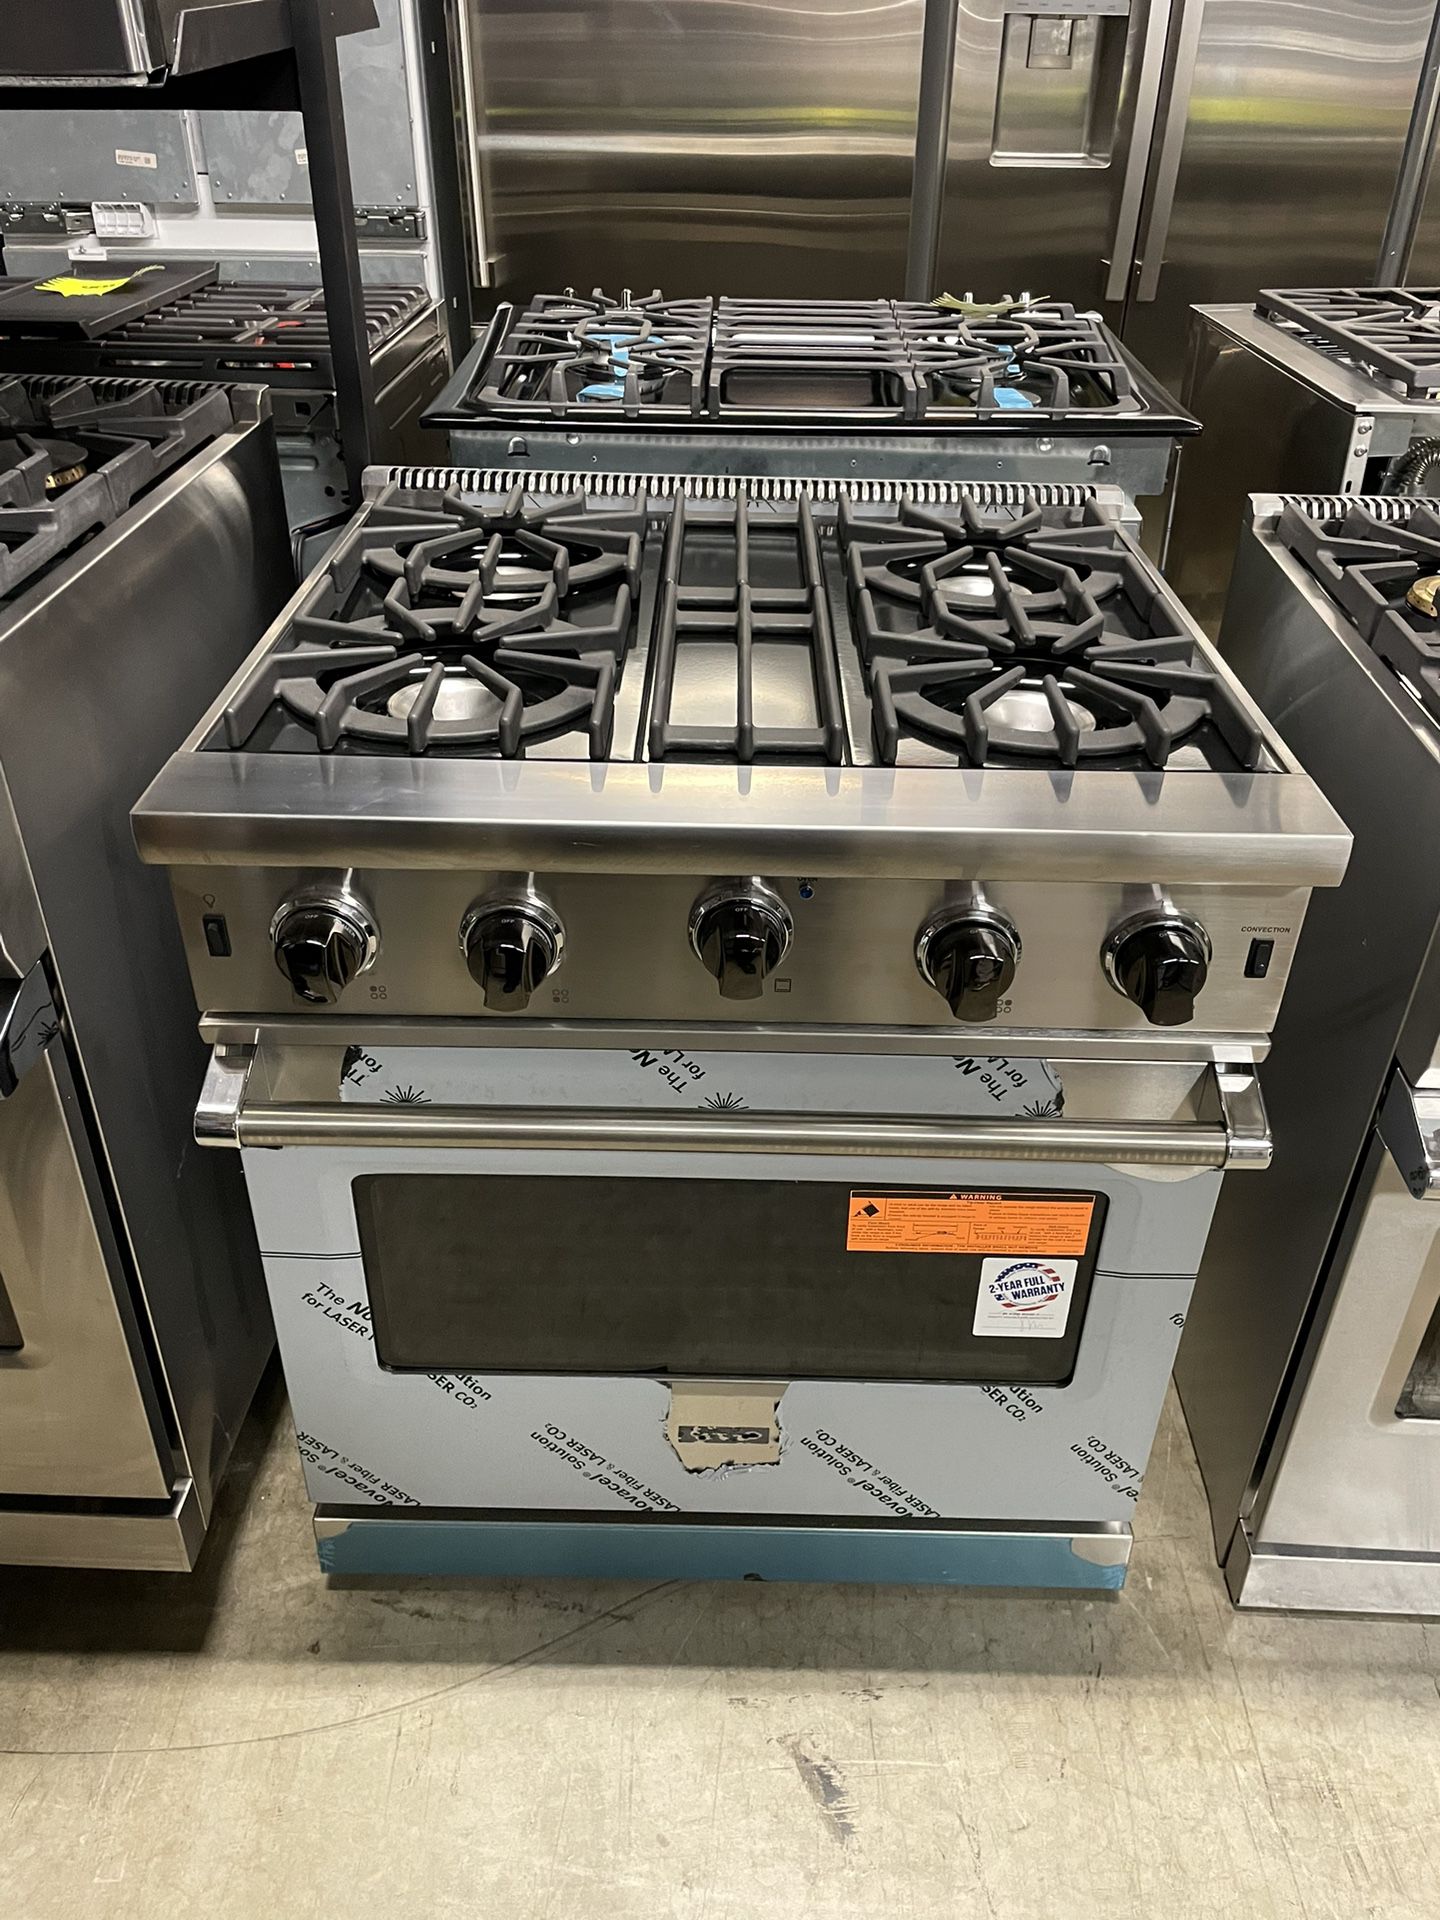 30 Inch Freestanding Professional Gas Range with 4 Open Burners, 4 Cu. Ft. Oven Capacity, Continuous Grates, Manual Clean, SureSpark™ Ignition System,